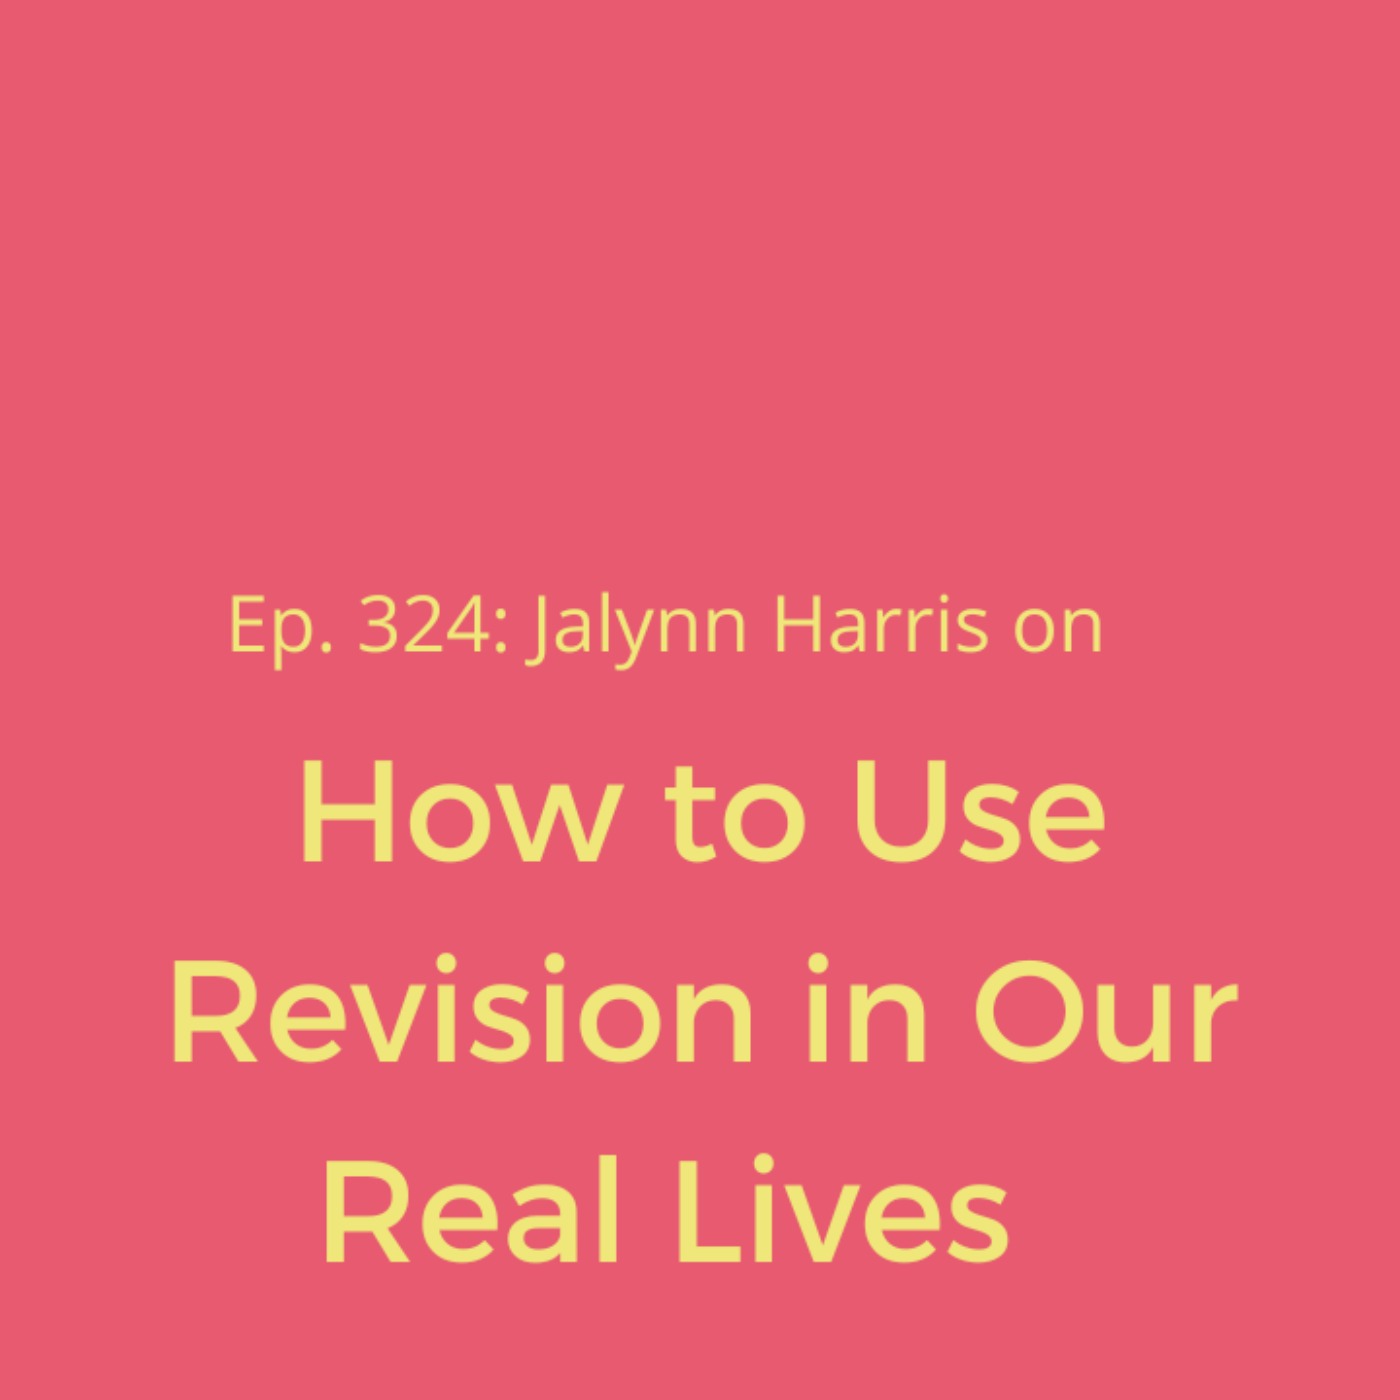 Ep. 324: Jalynn Harris on How to Use Revision in Our Real Lives